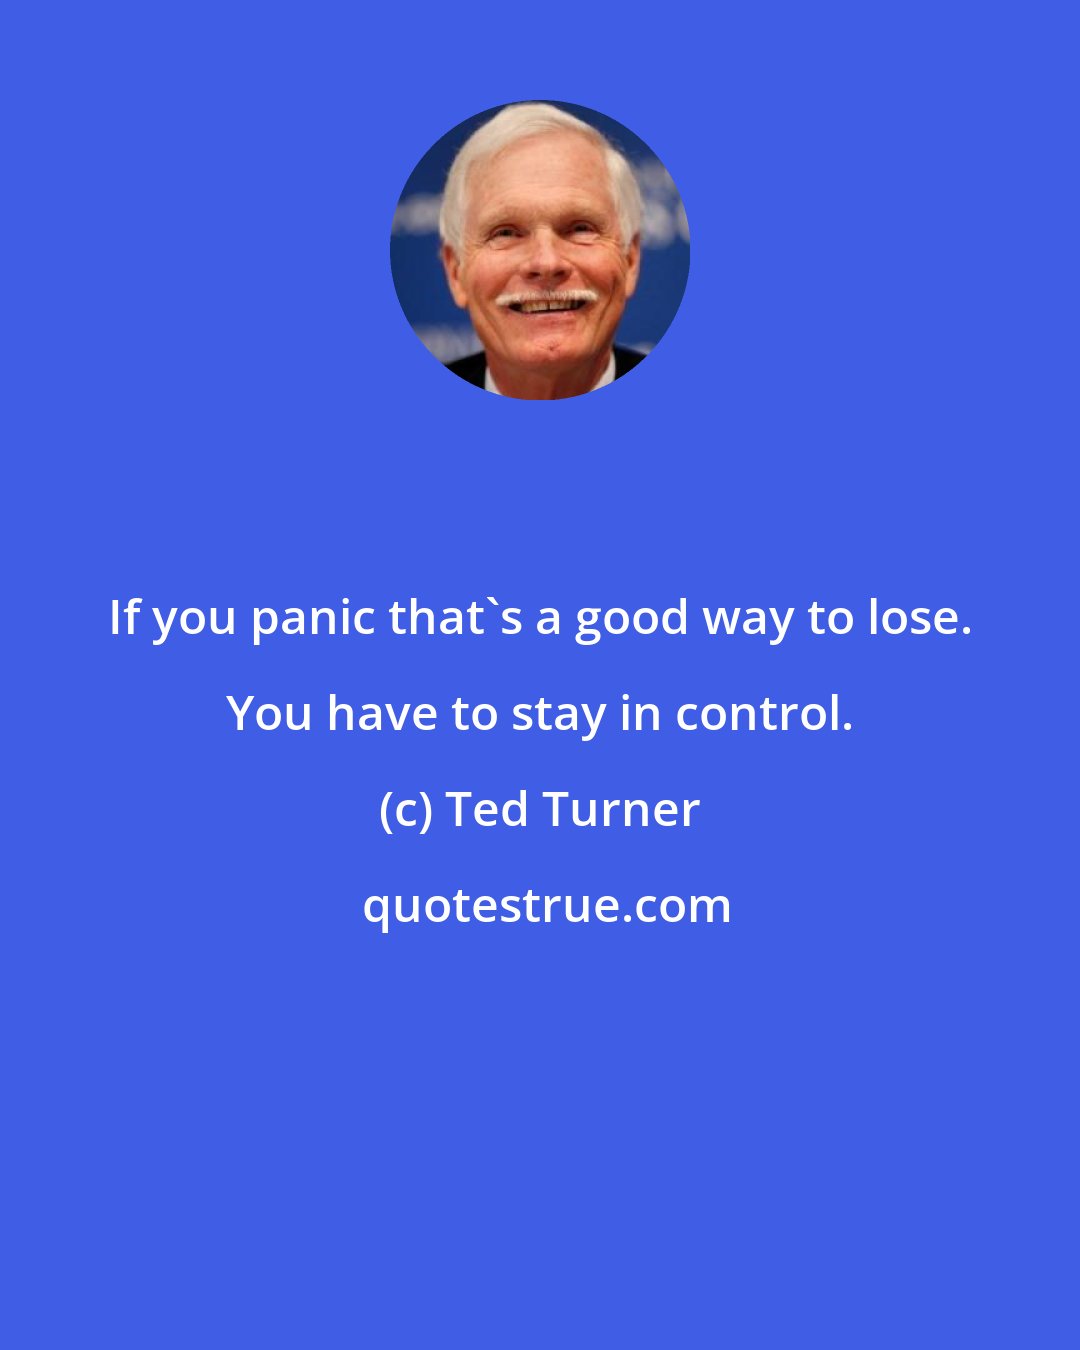 Ted Turner: If you panic that's a good way to lose. You have to stay in control.